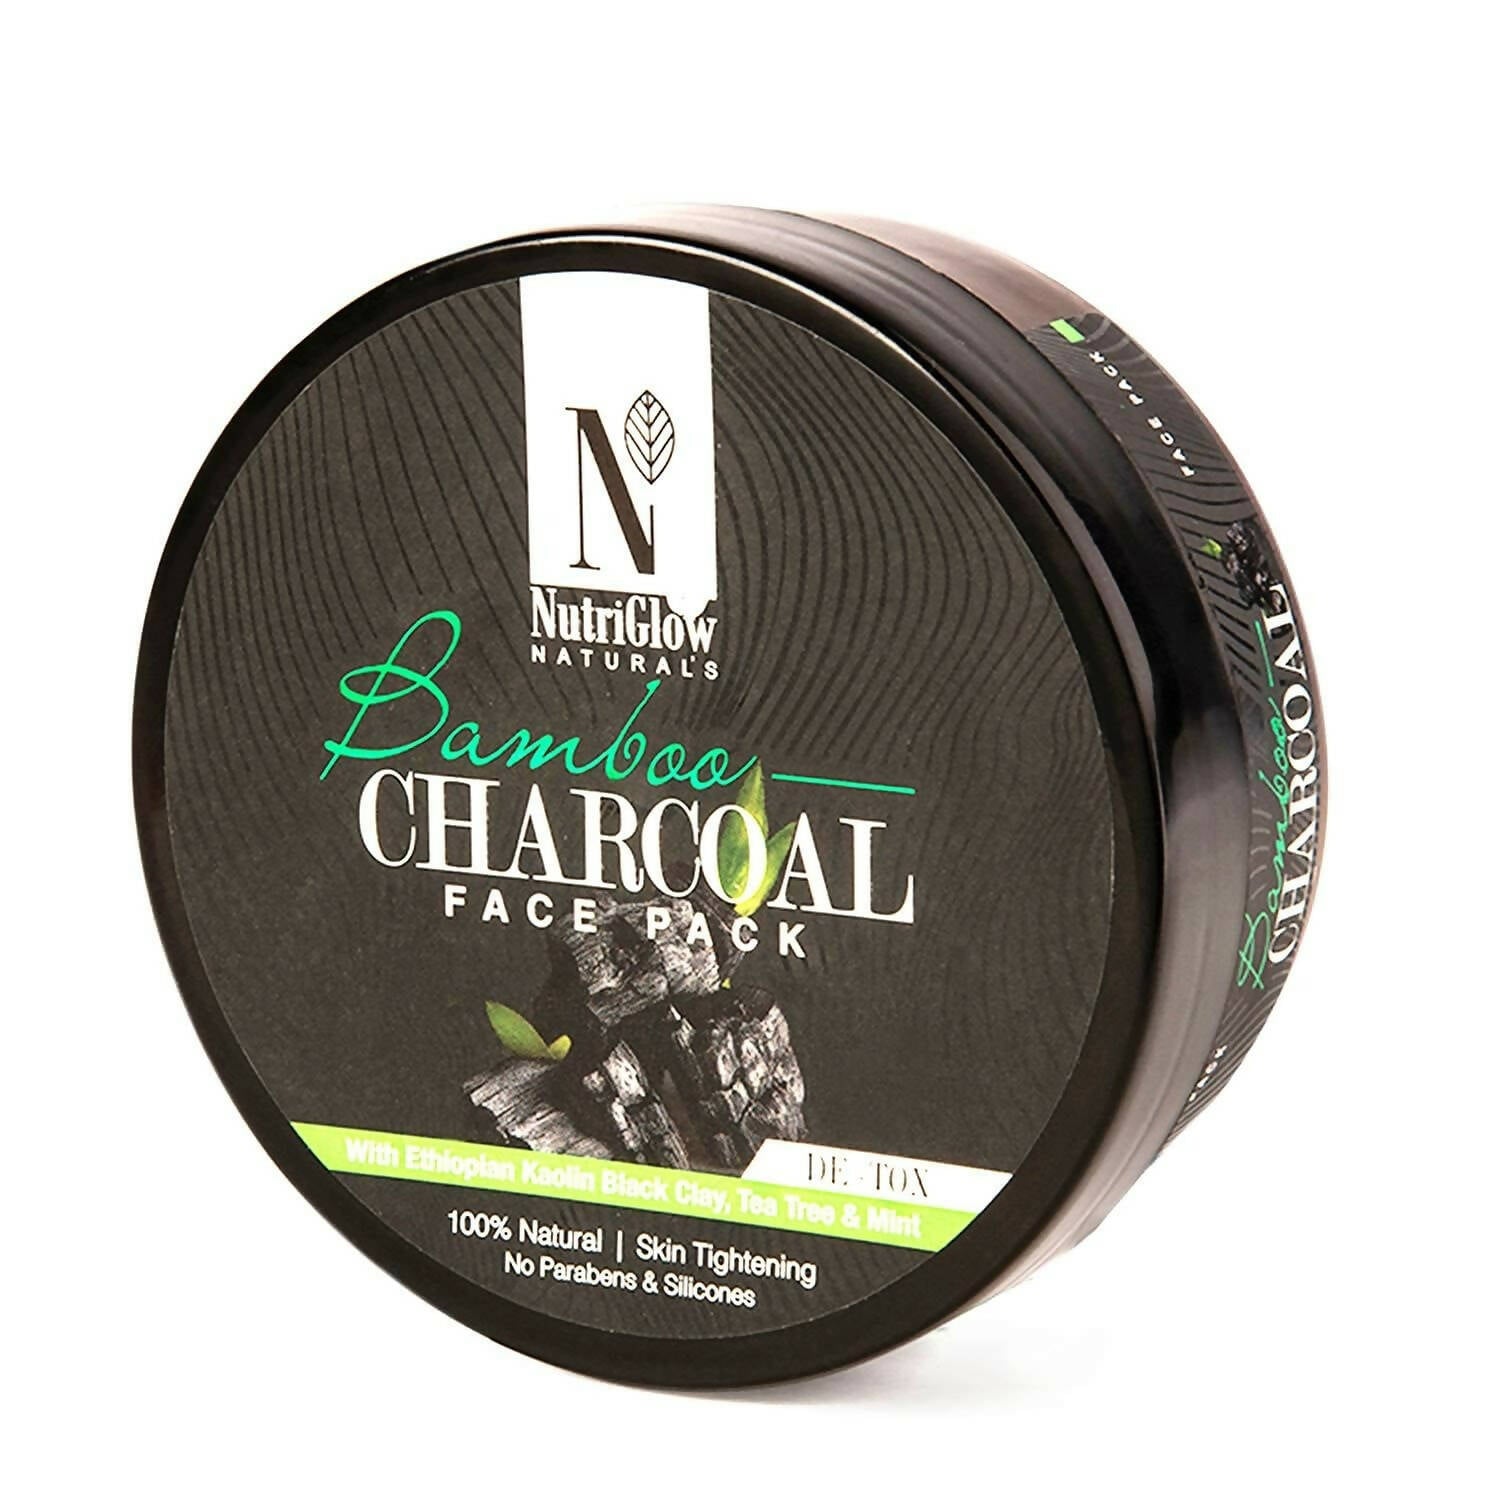 NutriGlow NATURAL'S Bamboo Charcoal Face Pack - BUDNEN